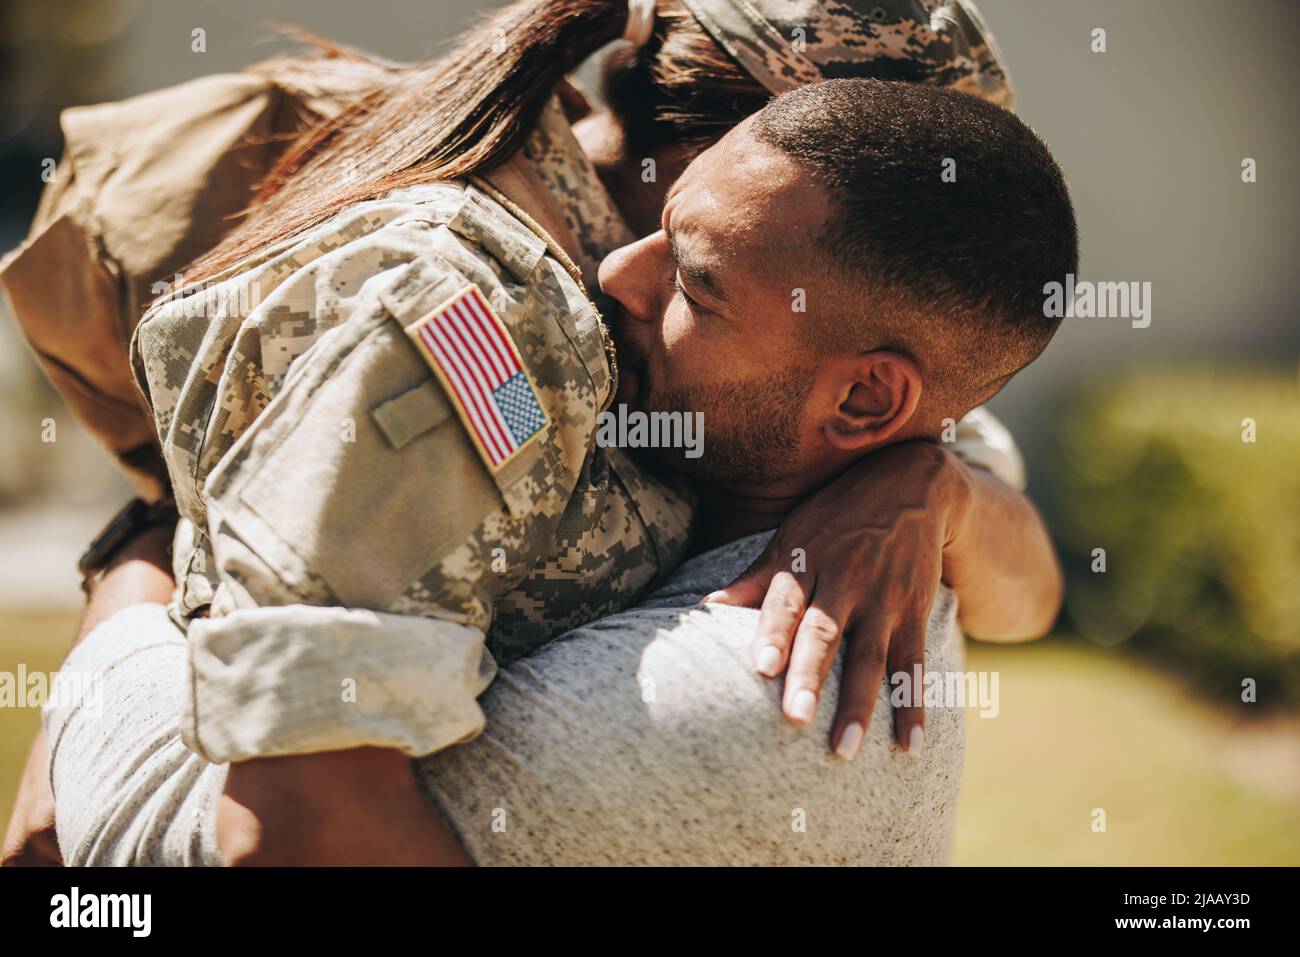 Heartwarming military homecoming. Female soldier embracing her husband after returning home from the army. American servicewoman reuniting with her hu Stock Photo